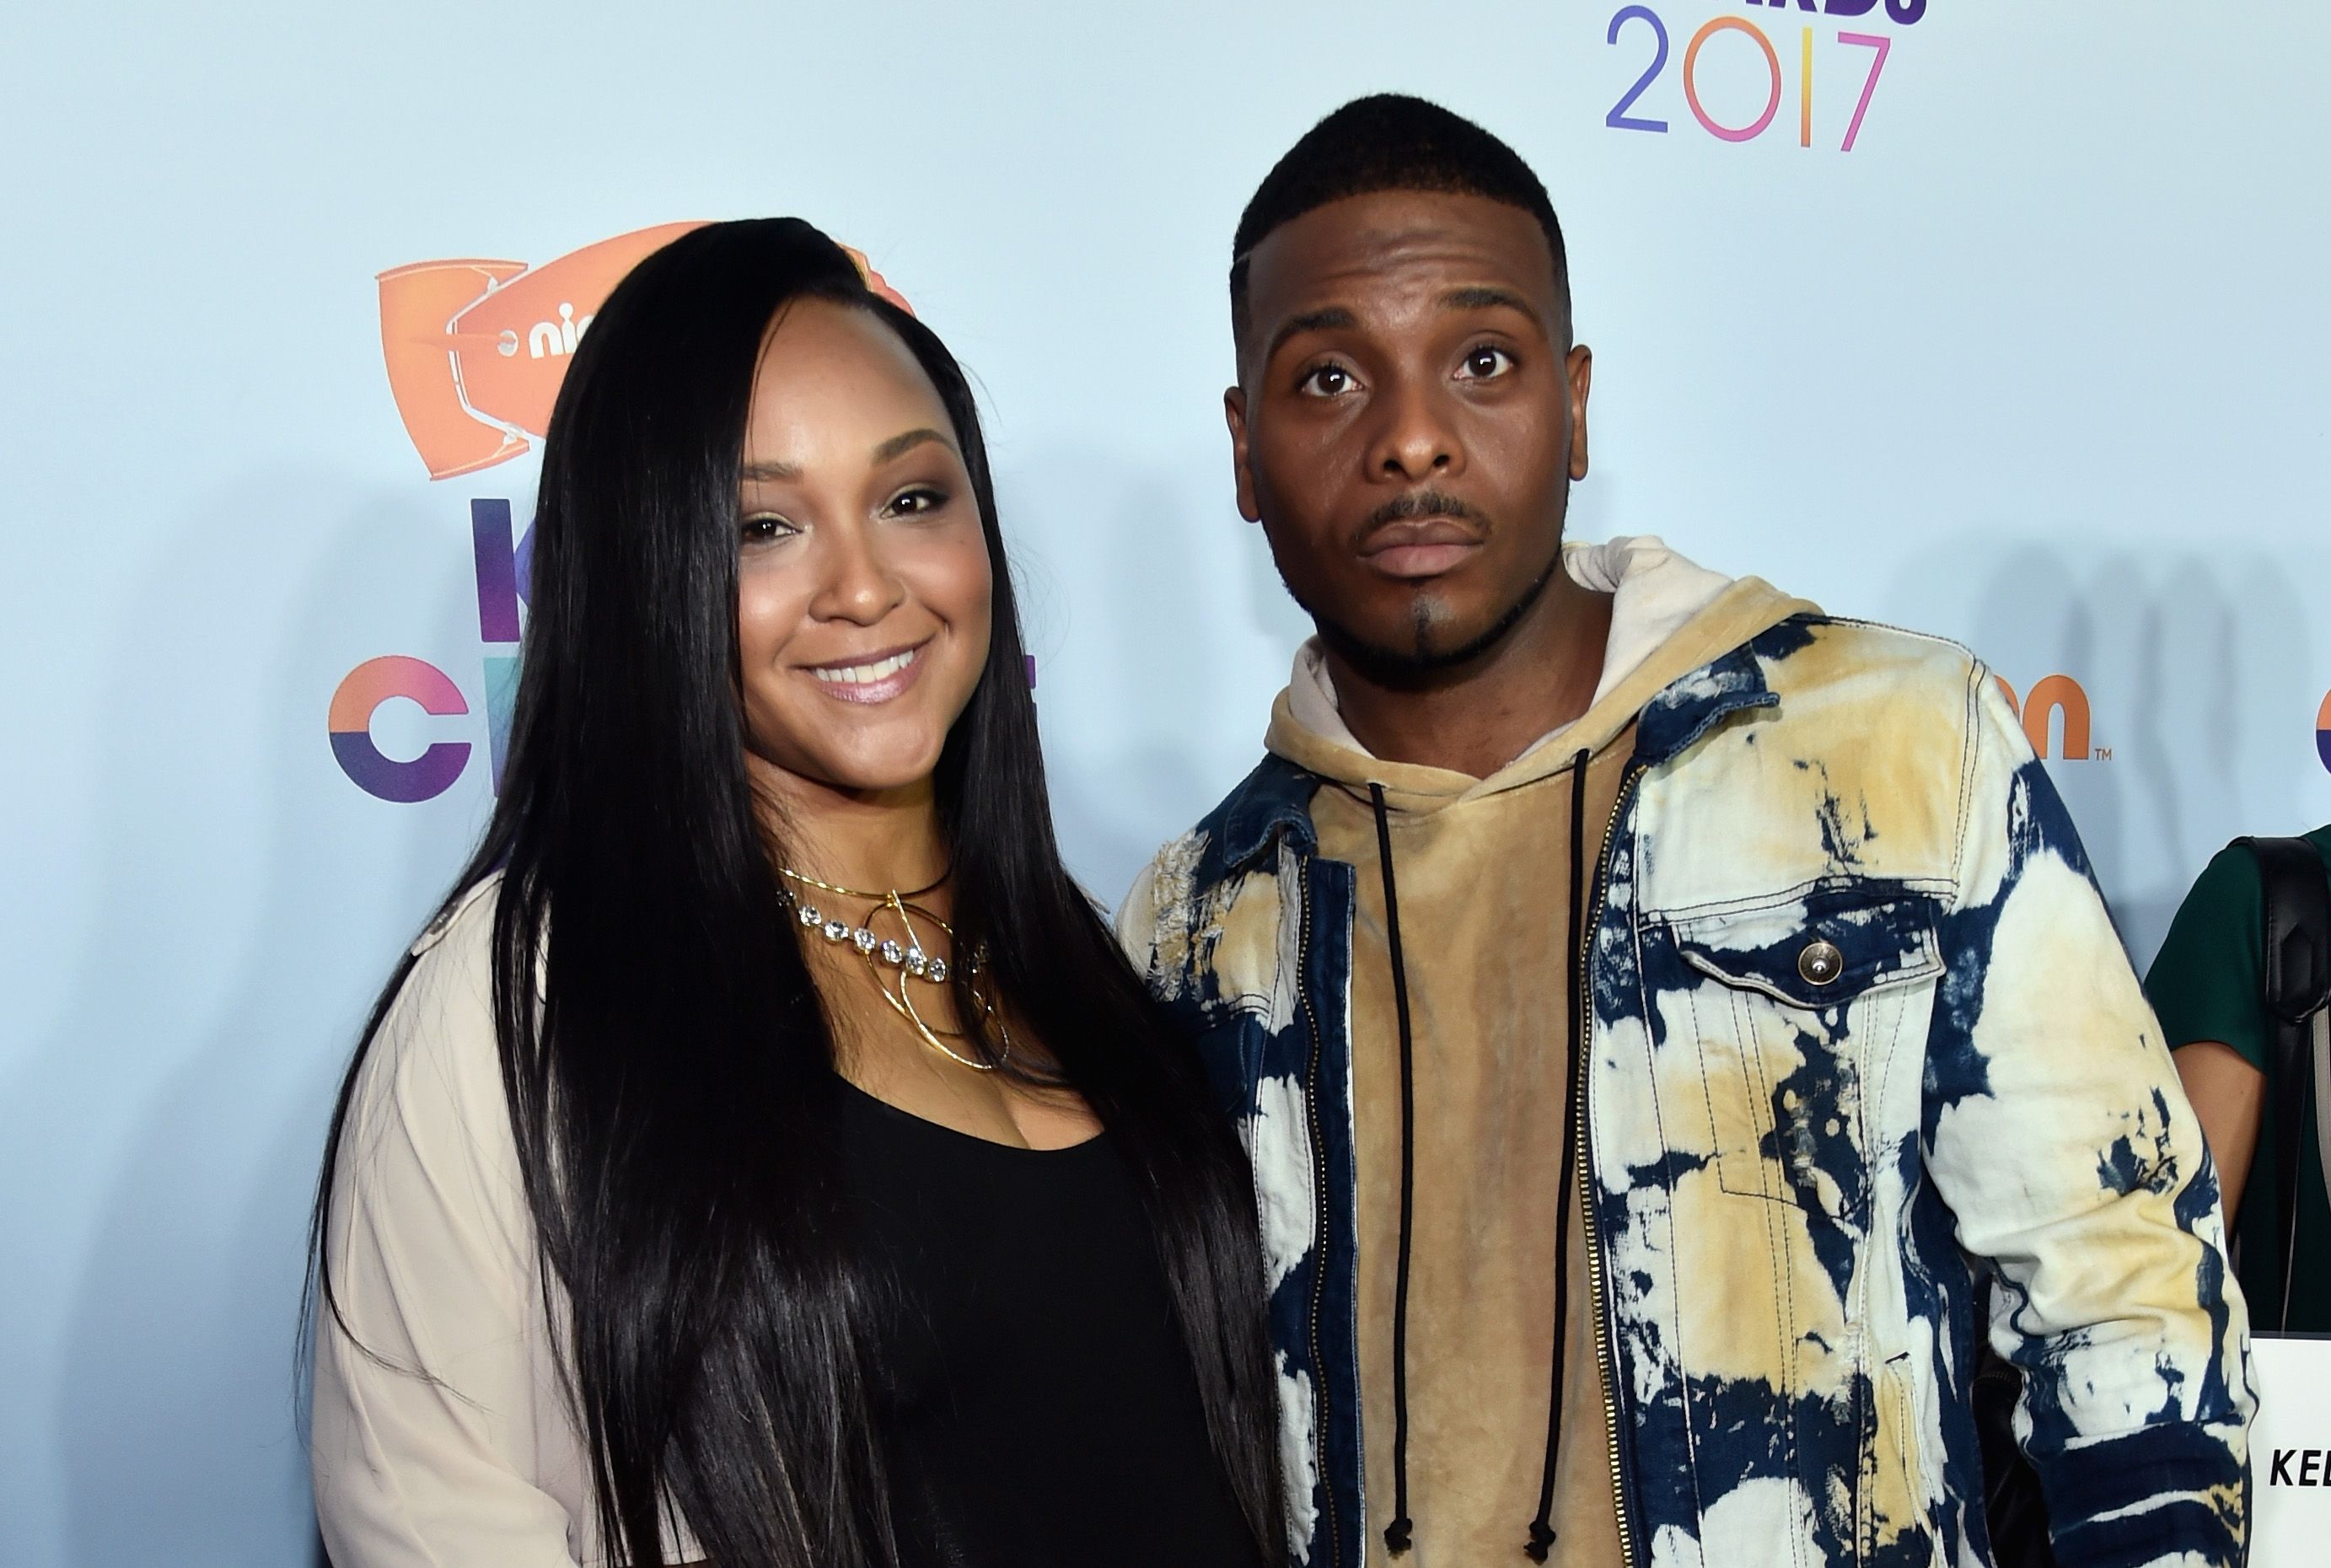 Asia Lee and Kel Mitchell at Nickelodeon's 2017 Kids' Choice Awards at USC Galen Center on March 11, 2017 | Photo: Getty Images